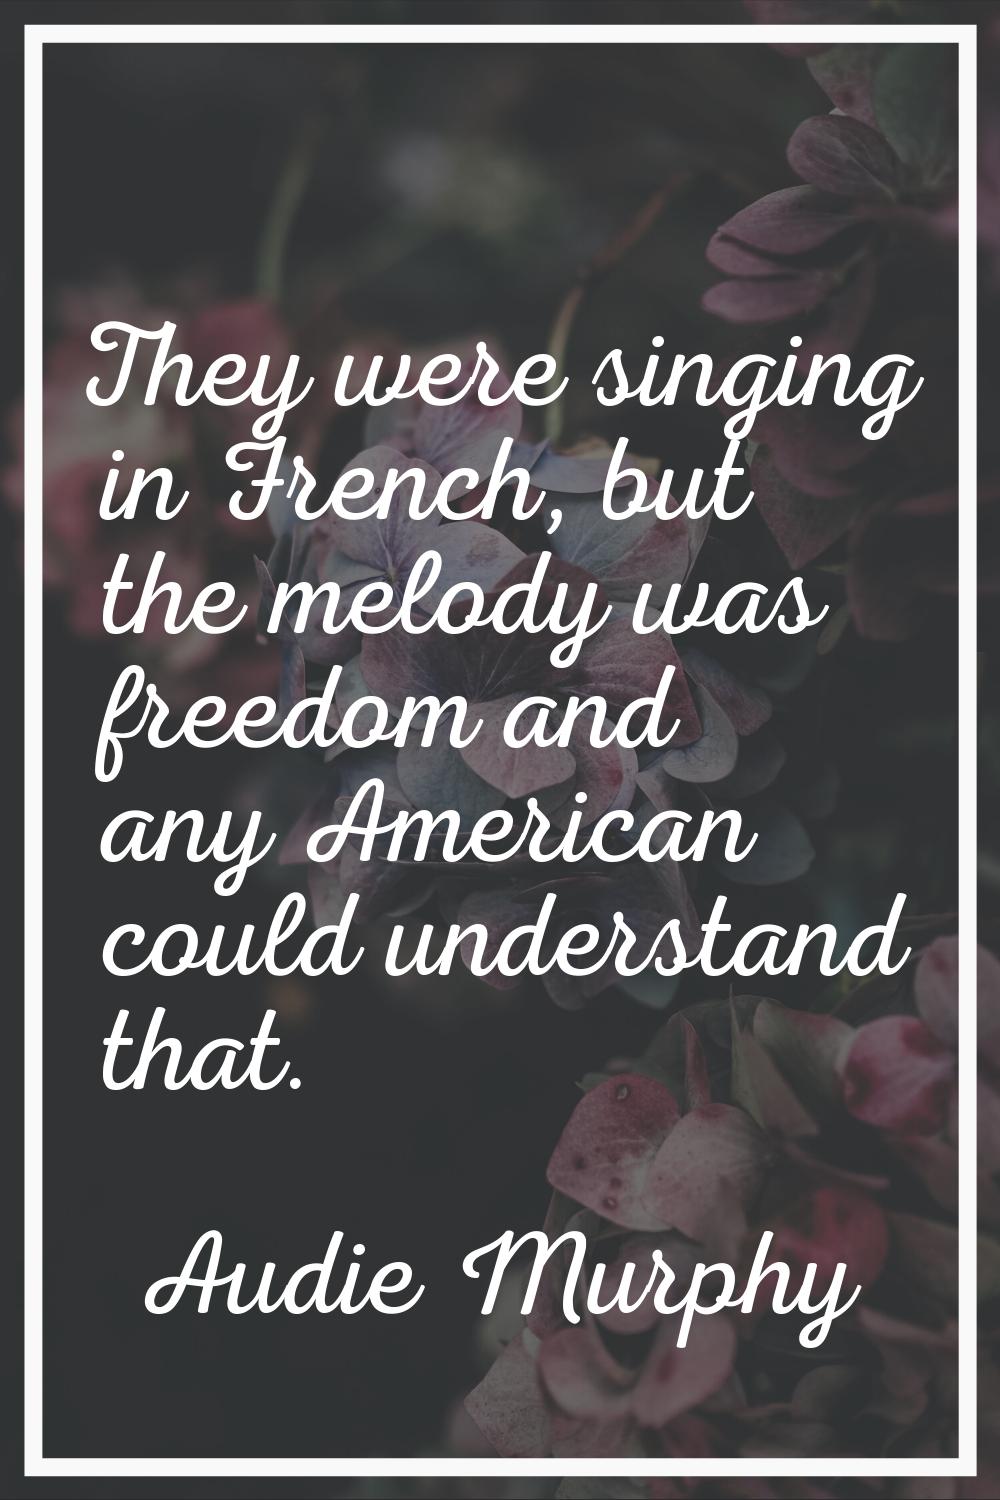 They were singing in French, but the melody was freedom and any American could understand that.